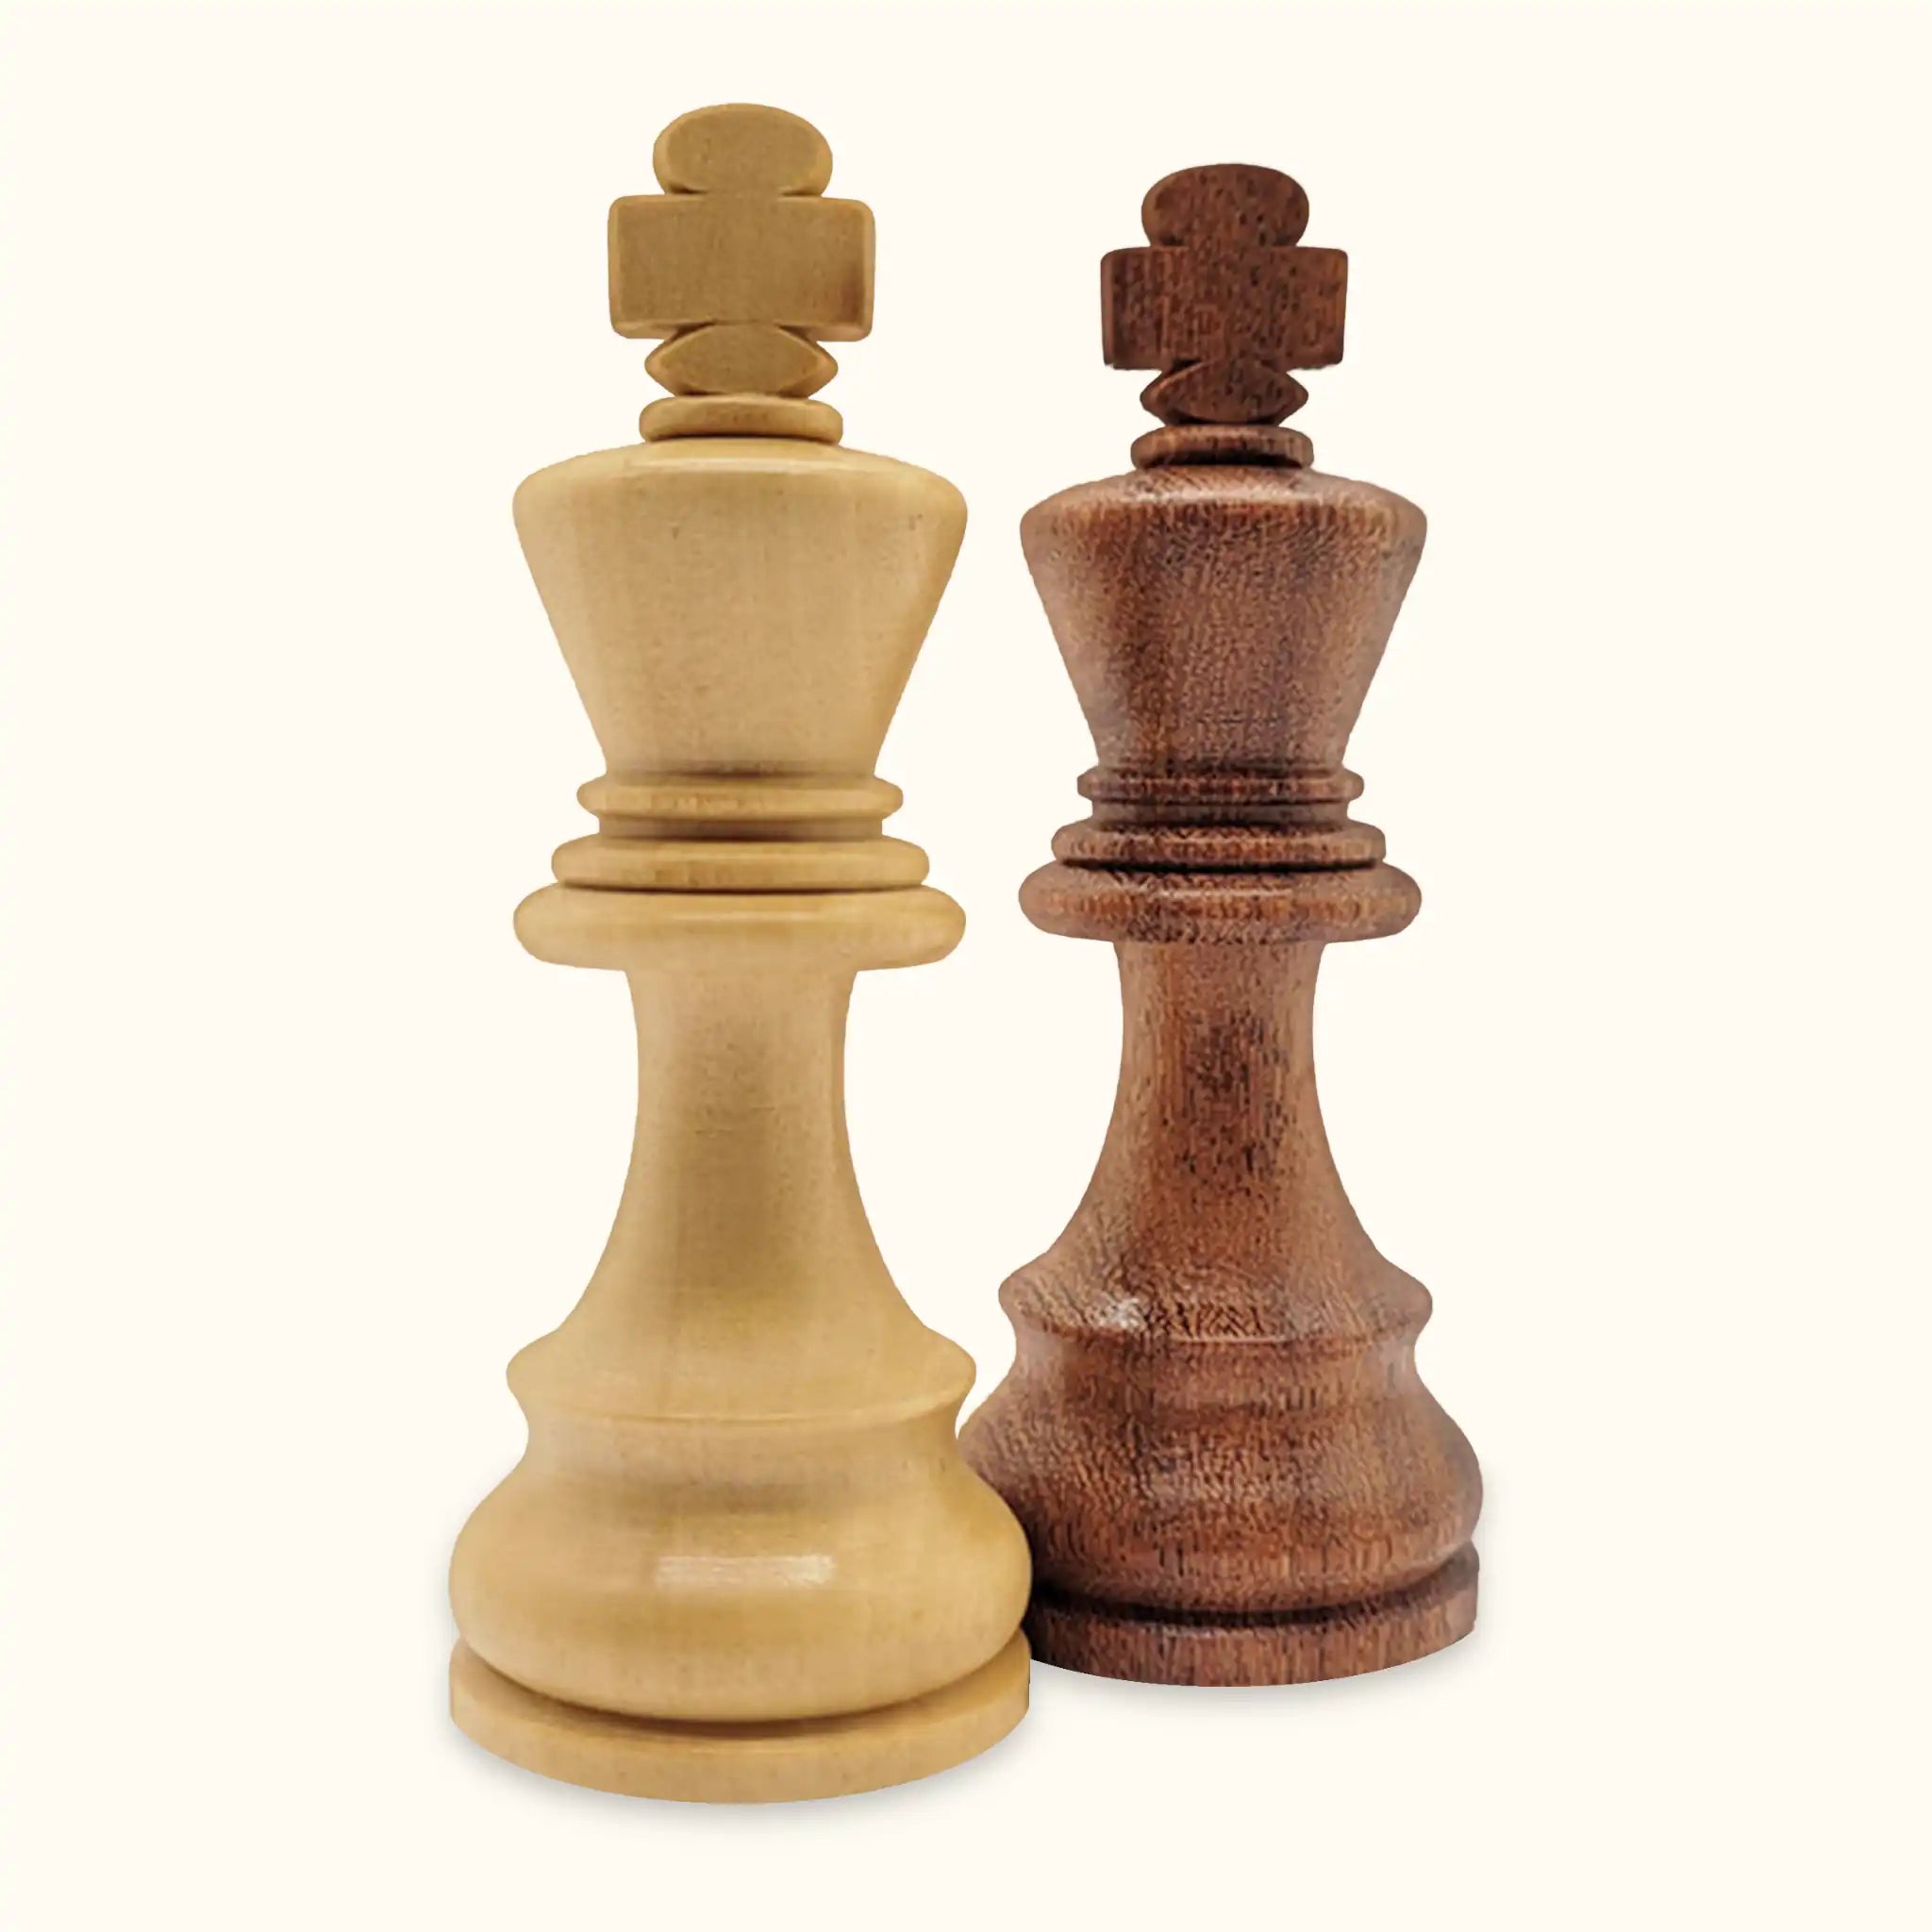 Chess Pieces: German Knight | Staunton | Wood | 4 Queens – Chess Chivalry